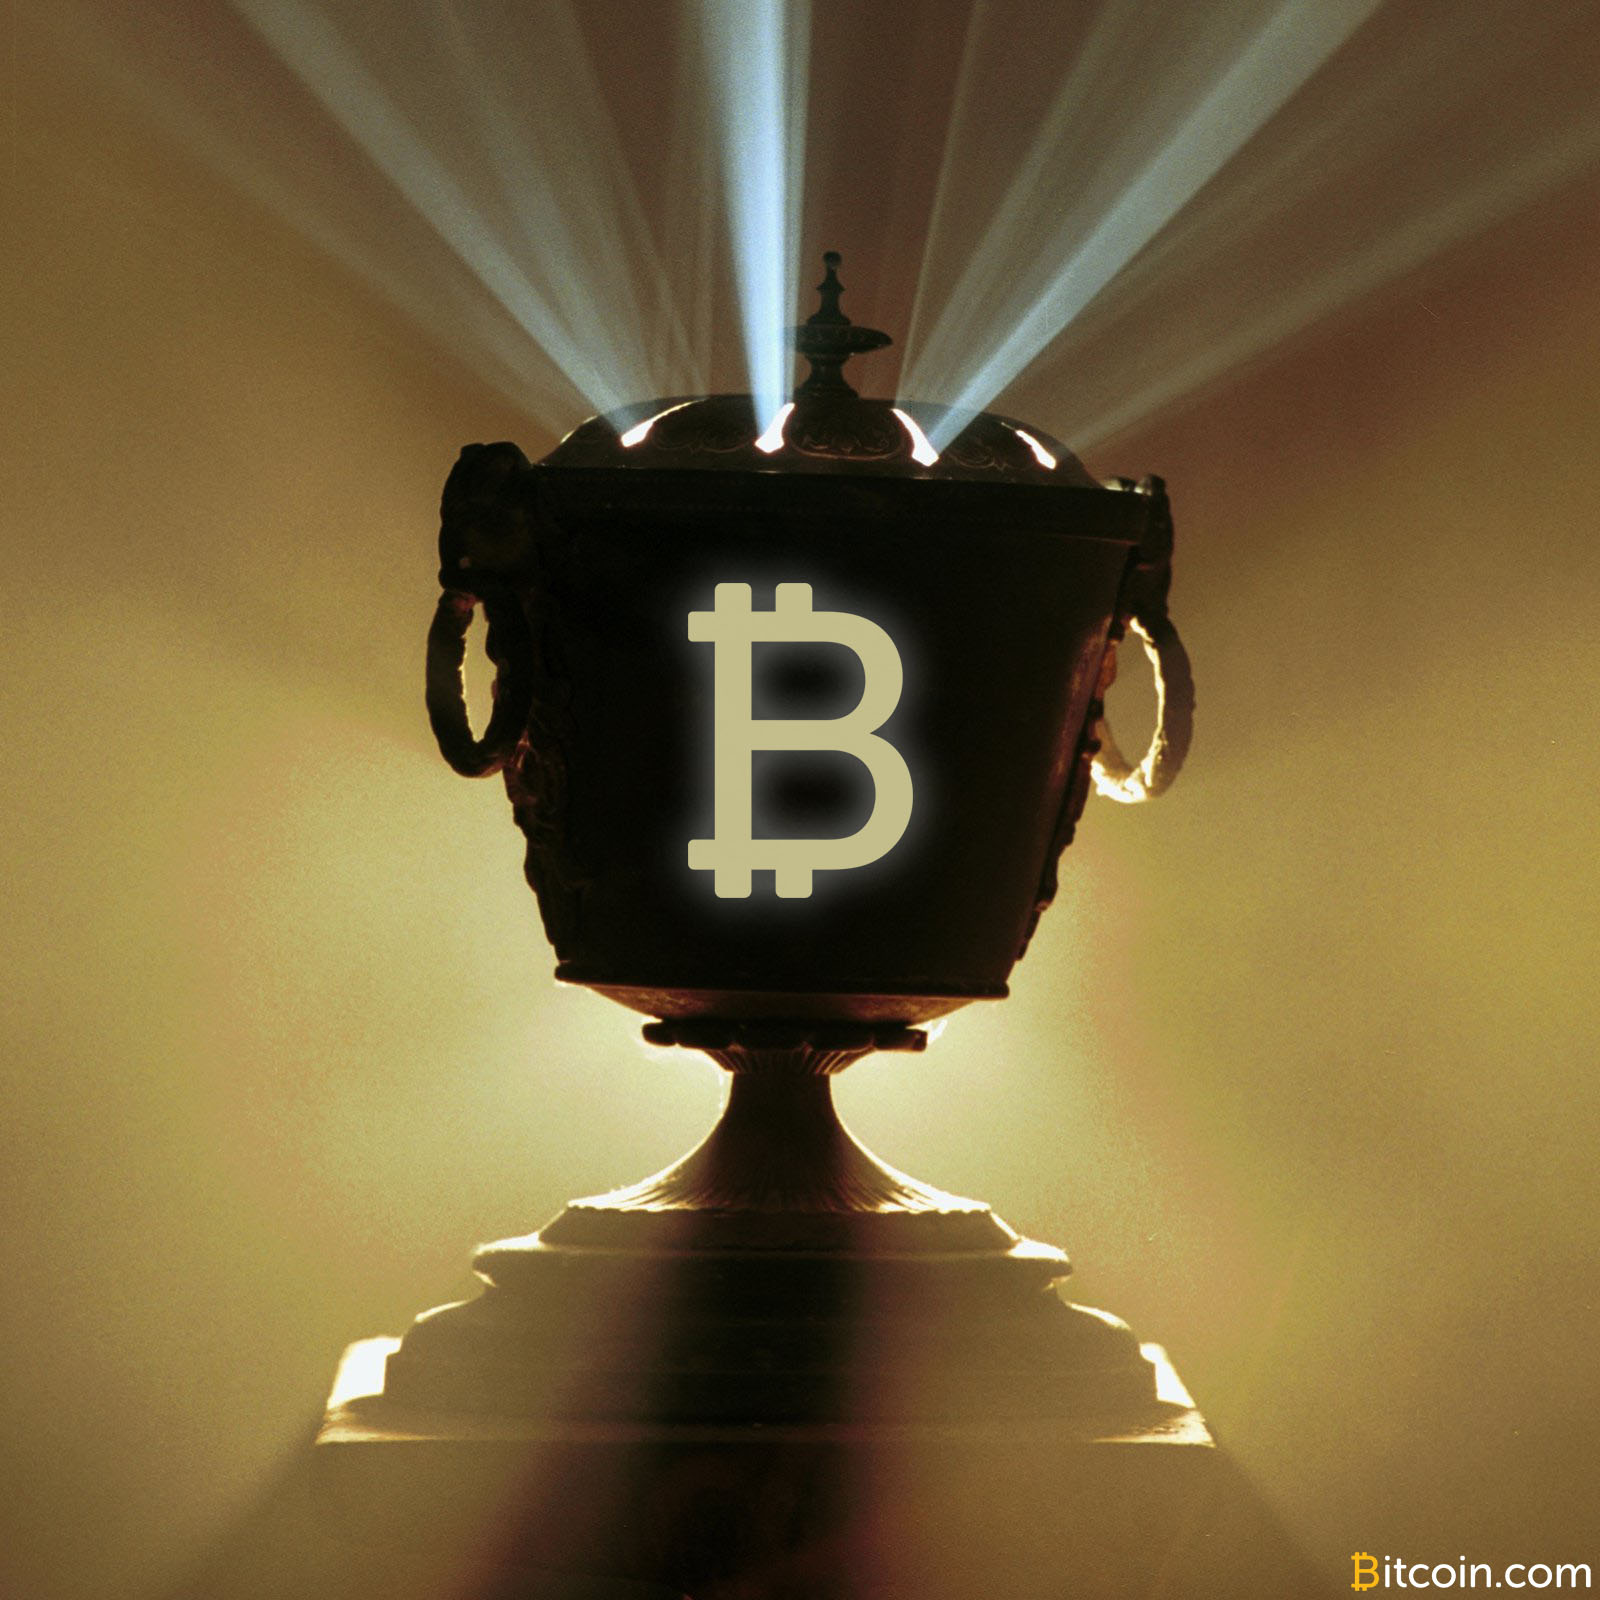 The Bitcoin ETF Holy Grail — Another Firm Attempts the Odds Against SEC